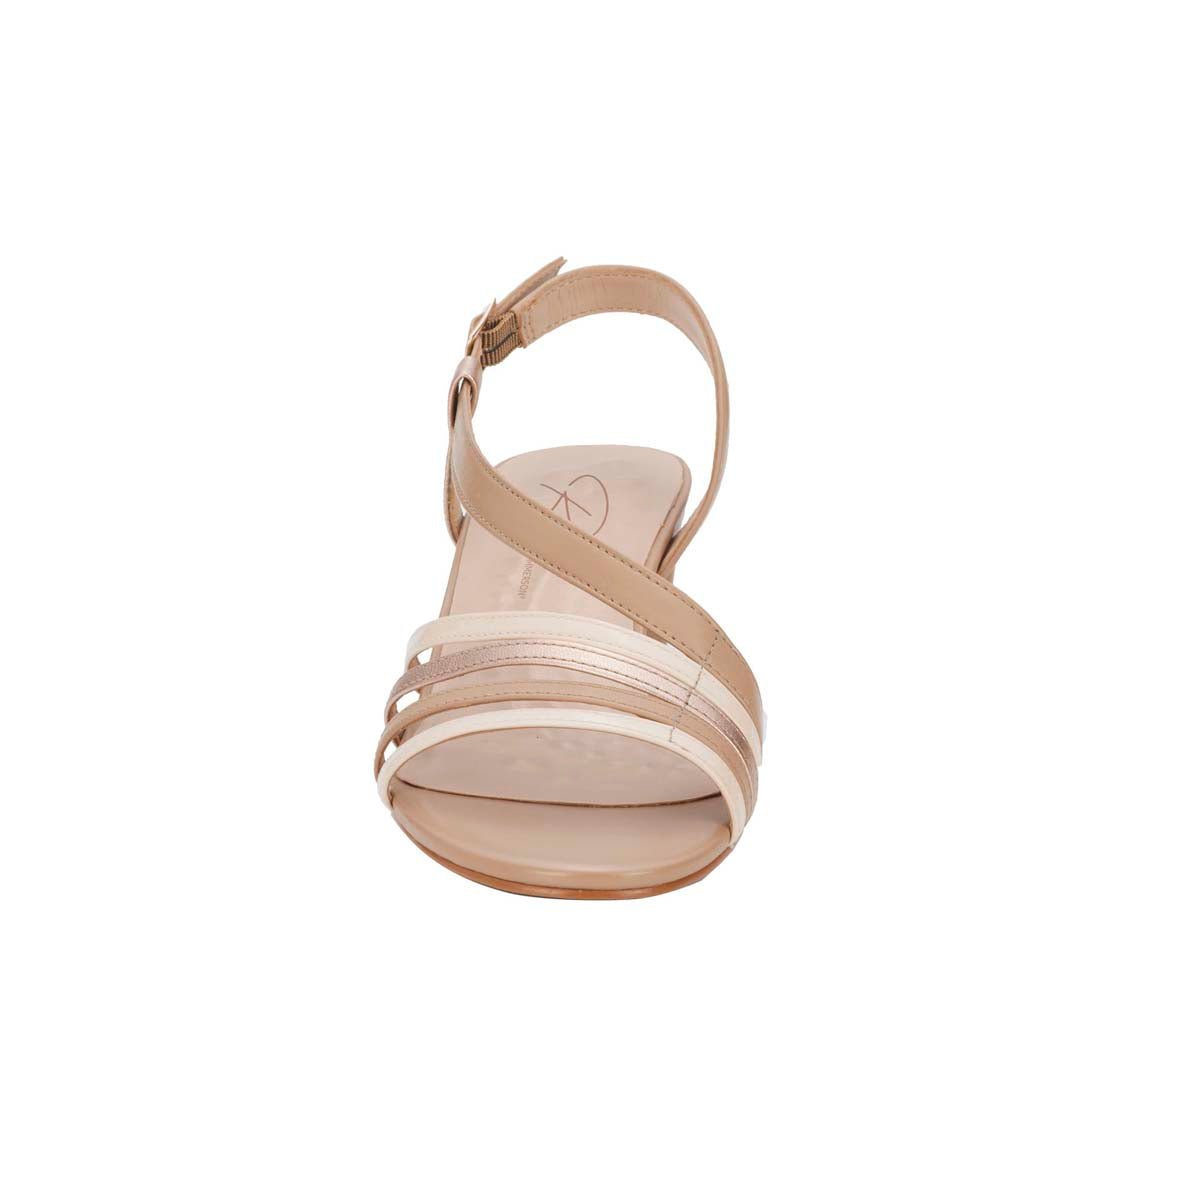 ROS HOMMERSON LETTIE WOMEN ADJUSTABLE HEEL STRAP SANDAL IN ROSE GOLD LEATHER - TLW Shoes